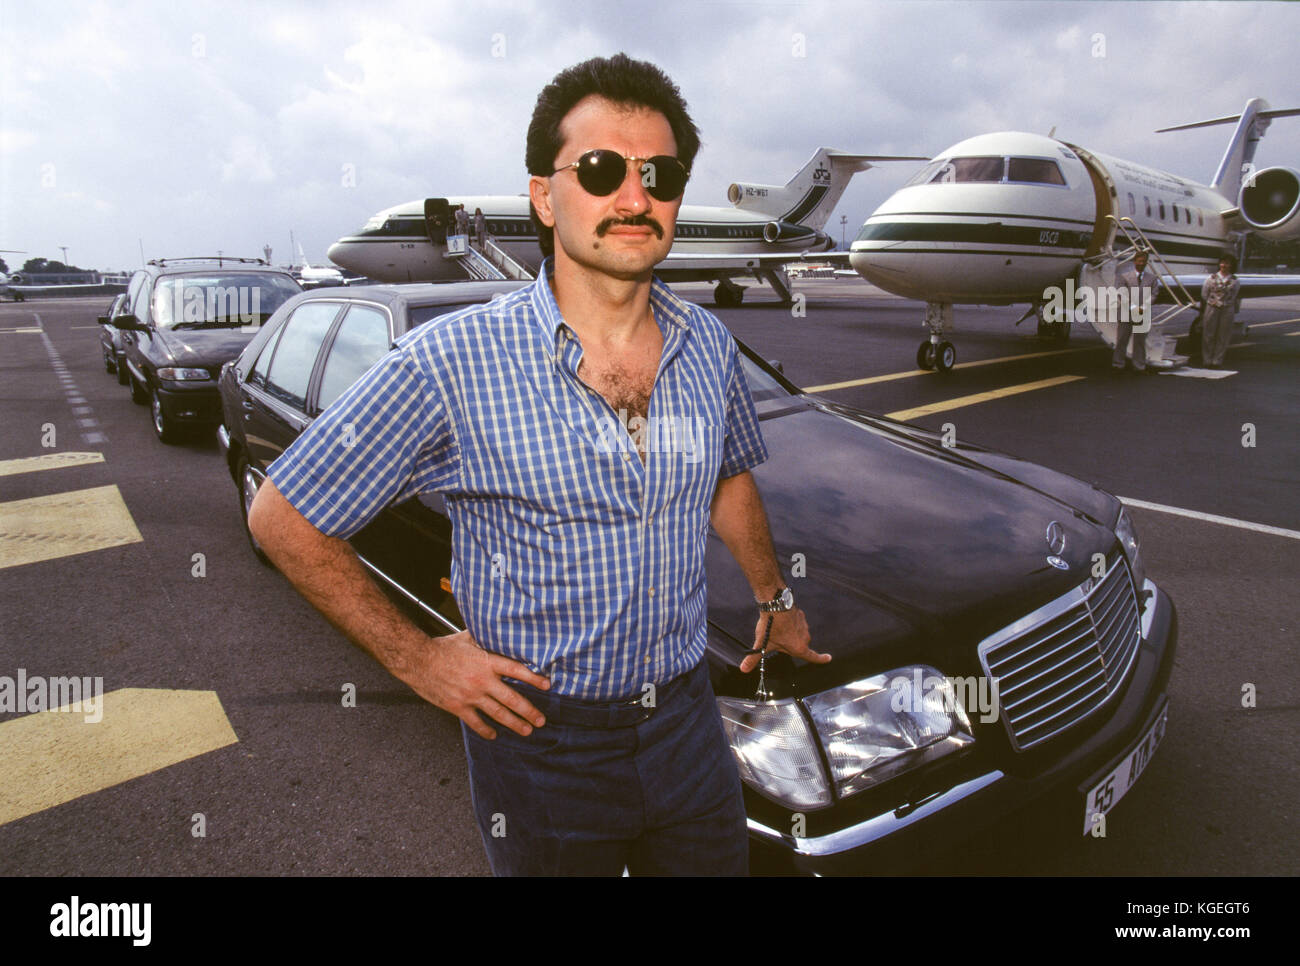 Saudi prince Al-Waleed Bin Talal bin Abdulaziz al Saud, businessman, investor and philanthropist, and member of the Saudi royal family, with his private jets and helicopter at Nice Airport where he summers with his children.  They stay on board his 'Kingdom 5KR', an 85-meter yacht, bought 'Trump Princess' from Donald Trump in the 1980s during his financial problems, who had in turn bought 'Nabila'  from Saudi arms dealer Khashoggi, during which time it appeared as the Flying Saucer in James Bond's 'Never Say Never Again', in Nice, France in 1997.  Al-Waleed was detained November 4th, 2017 in a Stock Photo